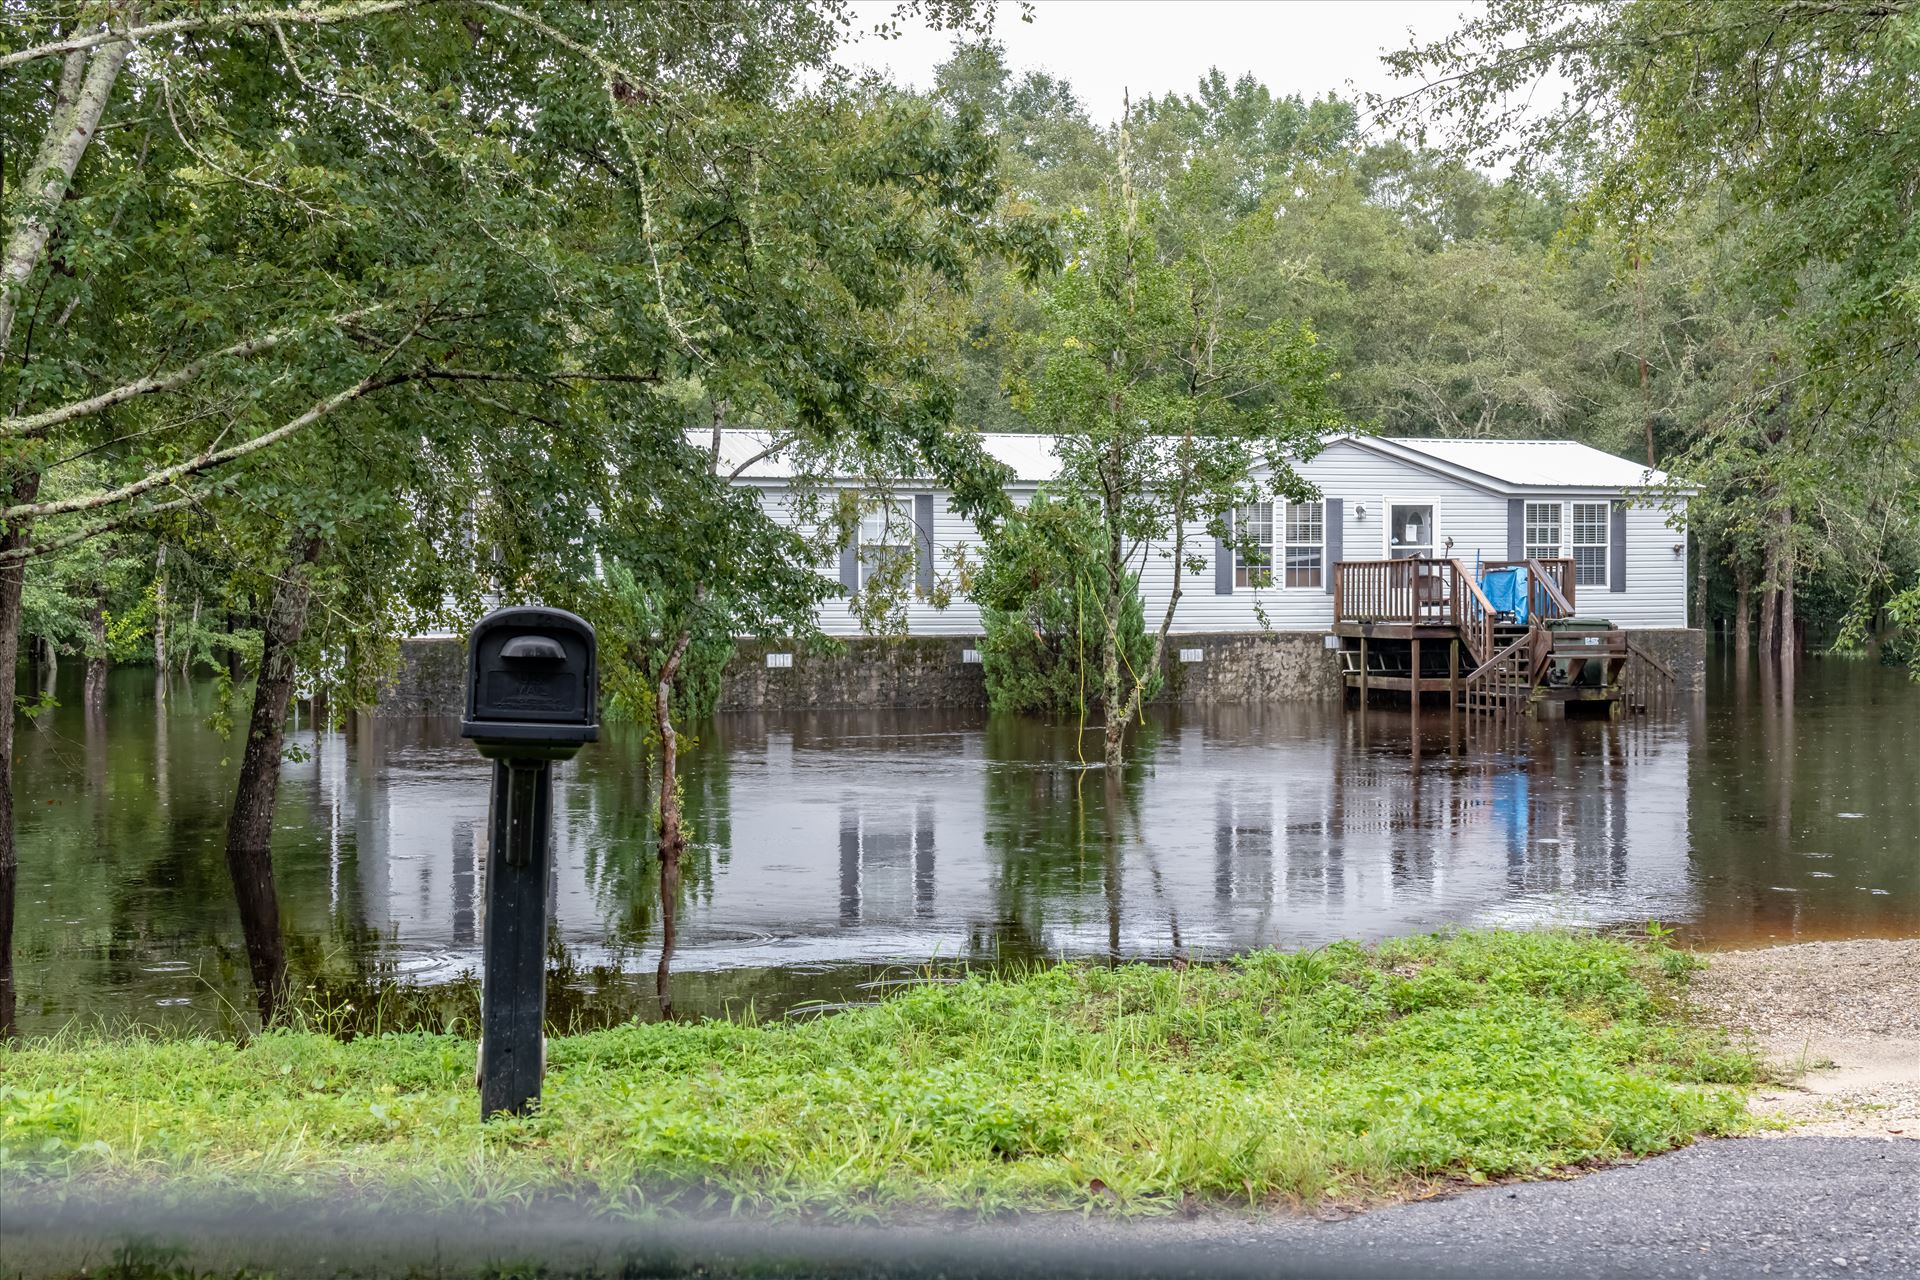 bear creek out of bank 7 August 02, 2018.jpg - August 02, 2018 heavy rains flooded many parts of Bay County, Florida. This photo is in the Bear Creek area. by Terry Kelly Photography